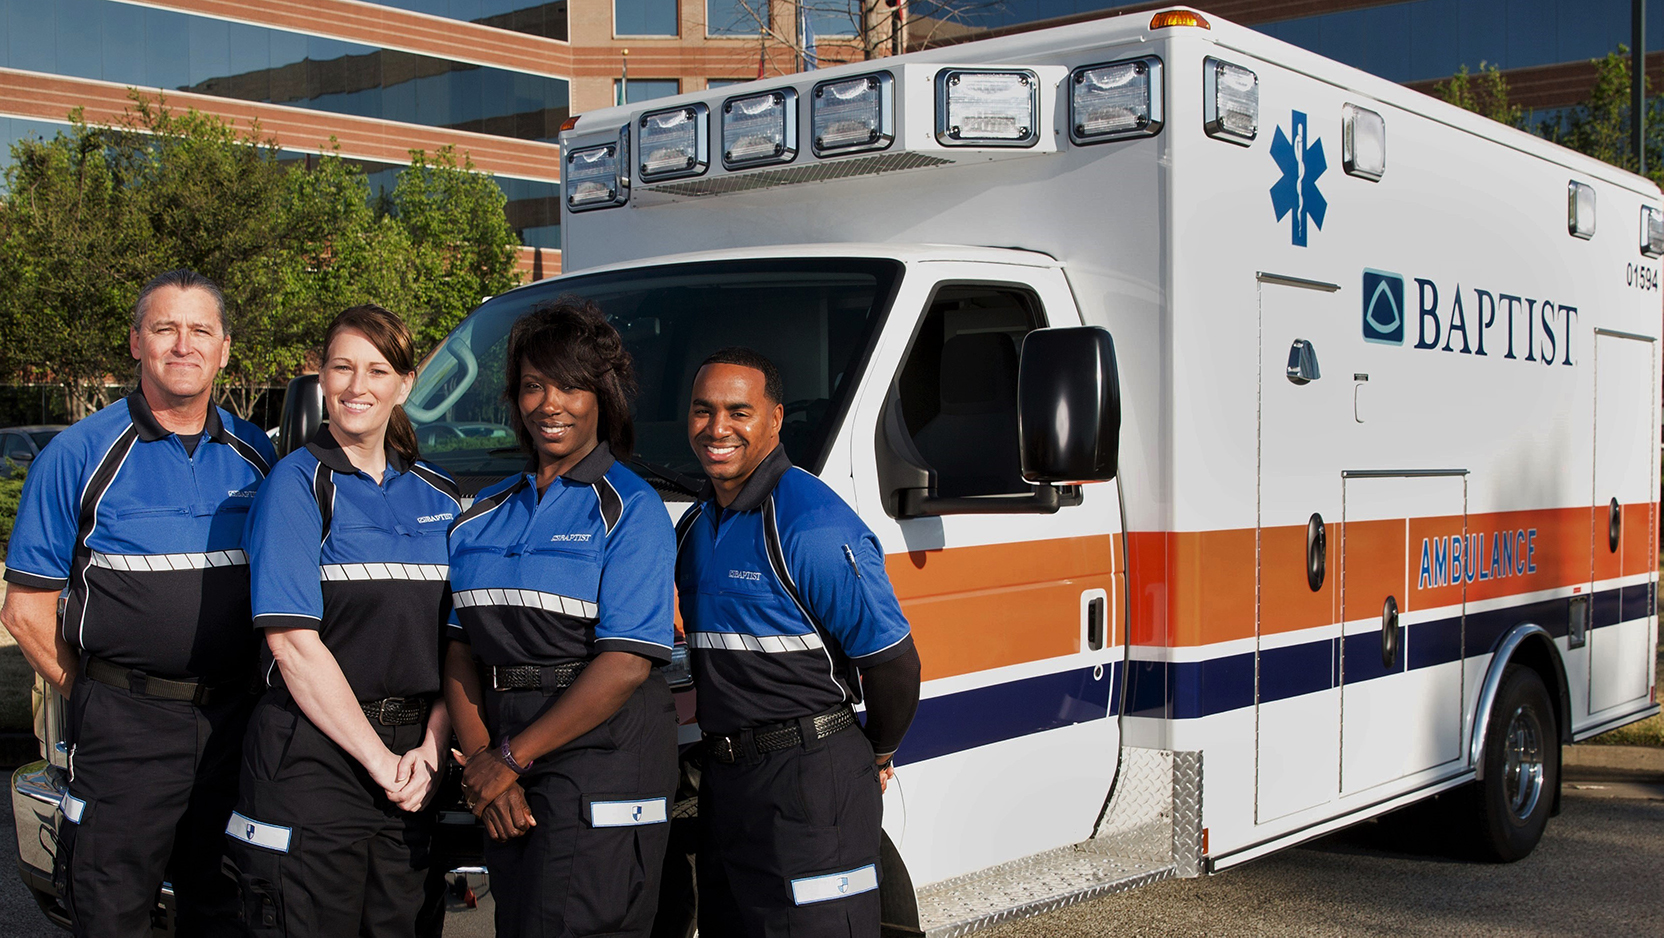 Featured image for “Priority Ambulance to begin serving Baptist Memorial Hospital-Booneville”